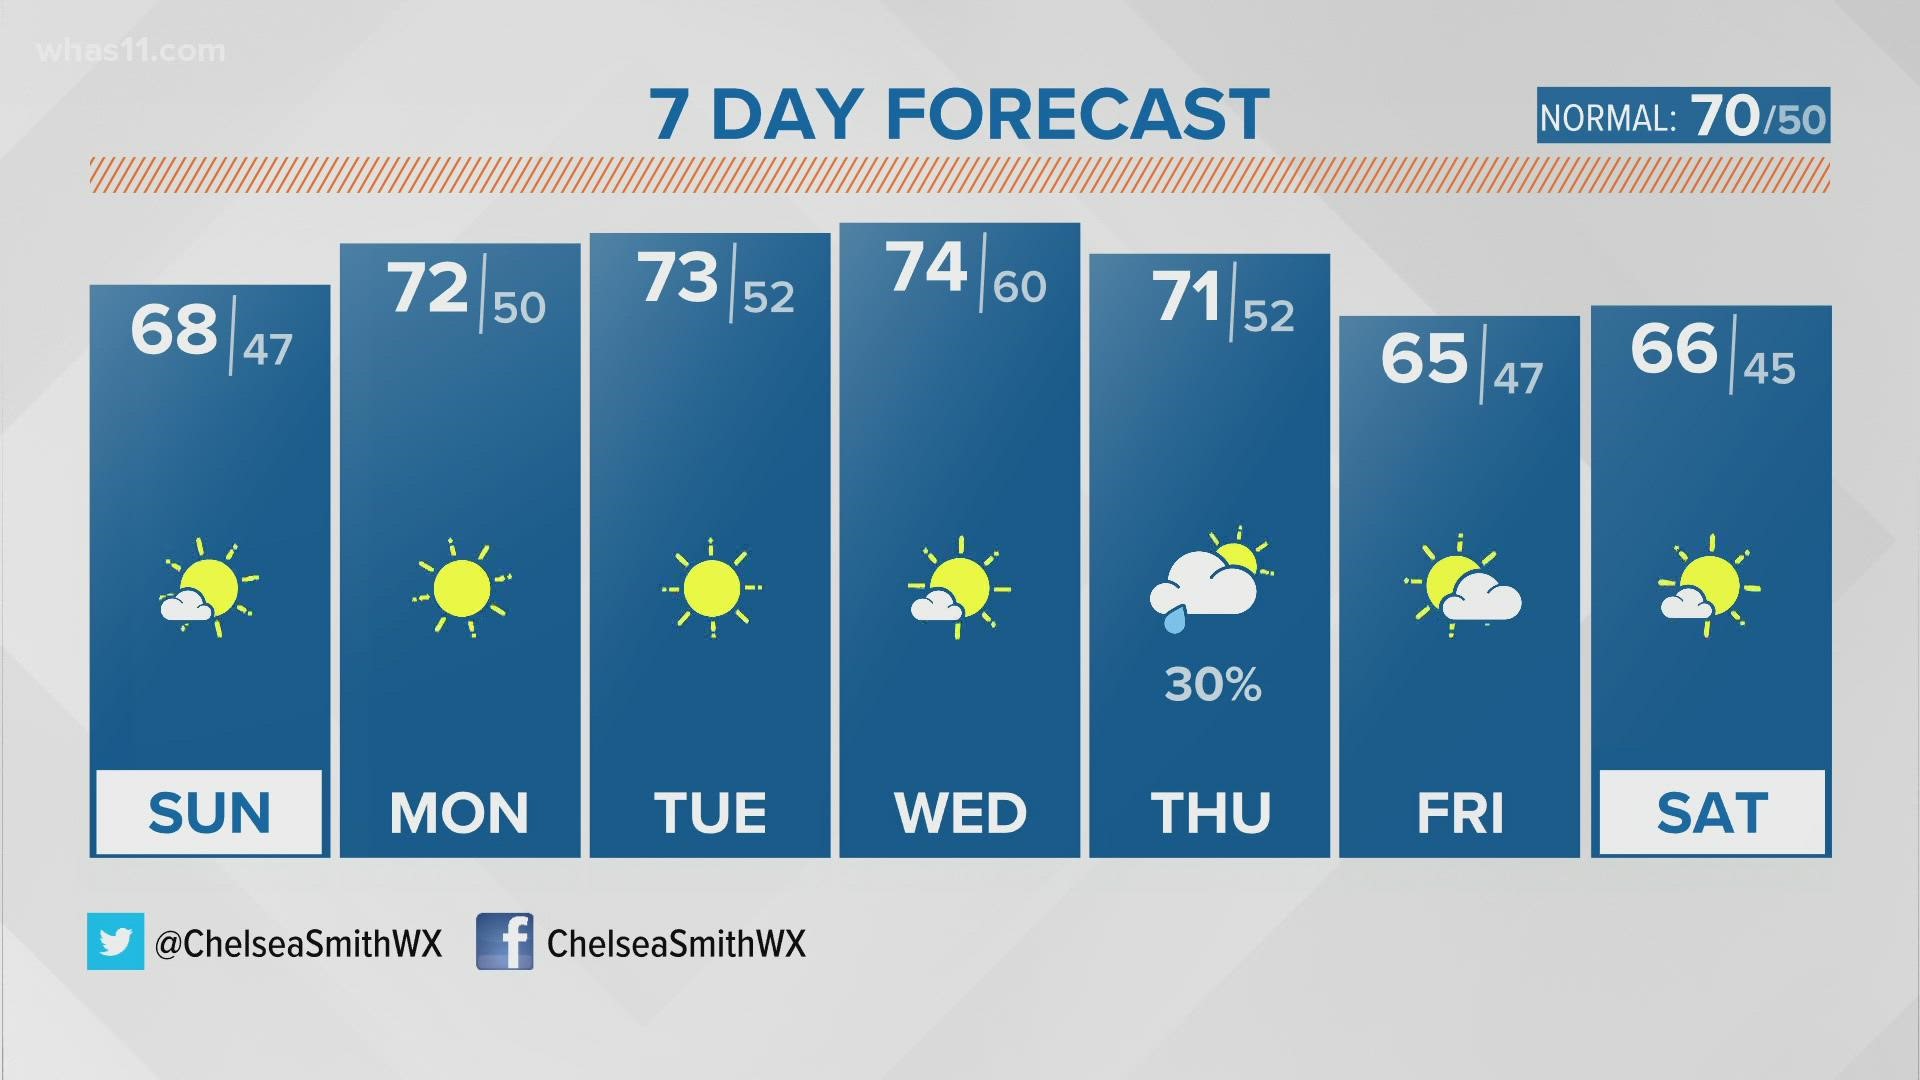 Sunshine and dry weather will stretch into the middle of the upcoming week. Next chance at rain arrives Thursday.